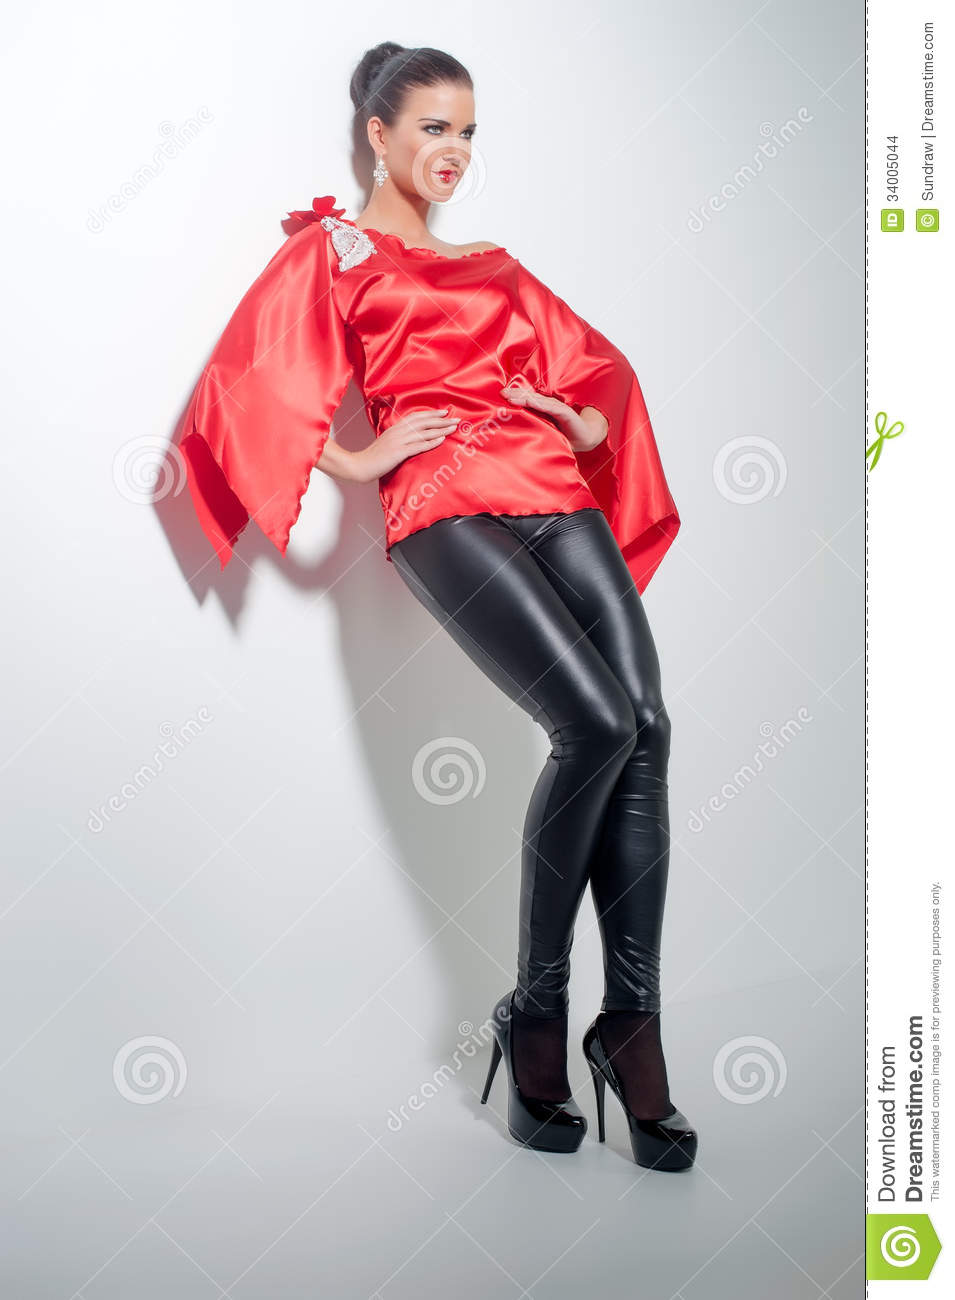 In Red Silk Tunic And Black Leggings Stock Images   Image  34005044